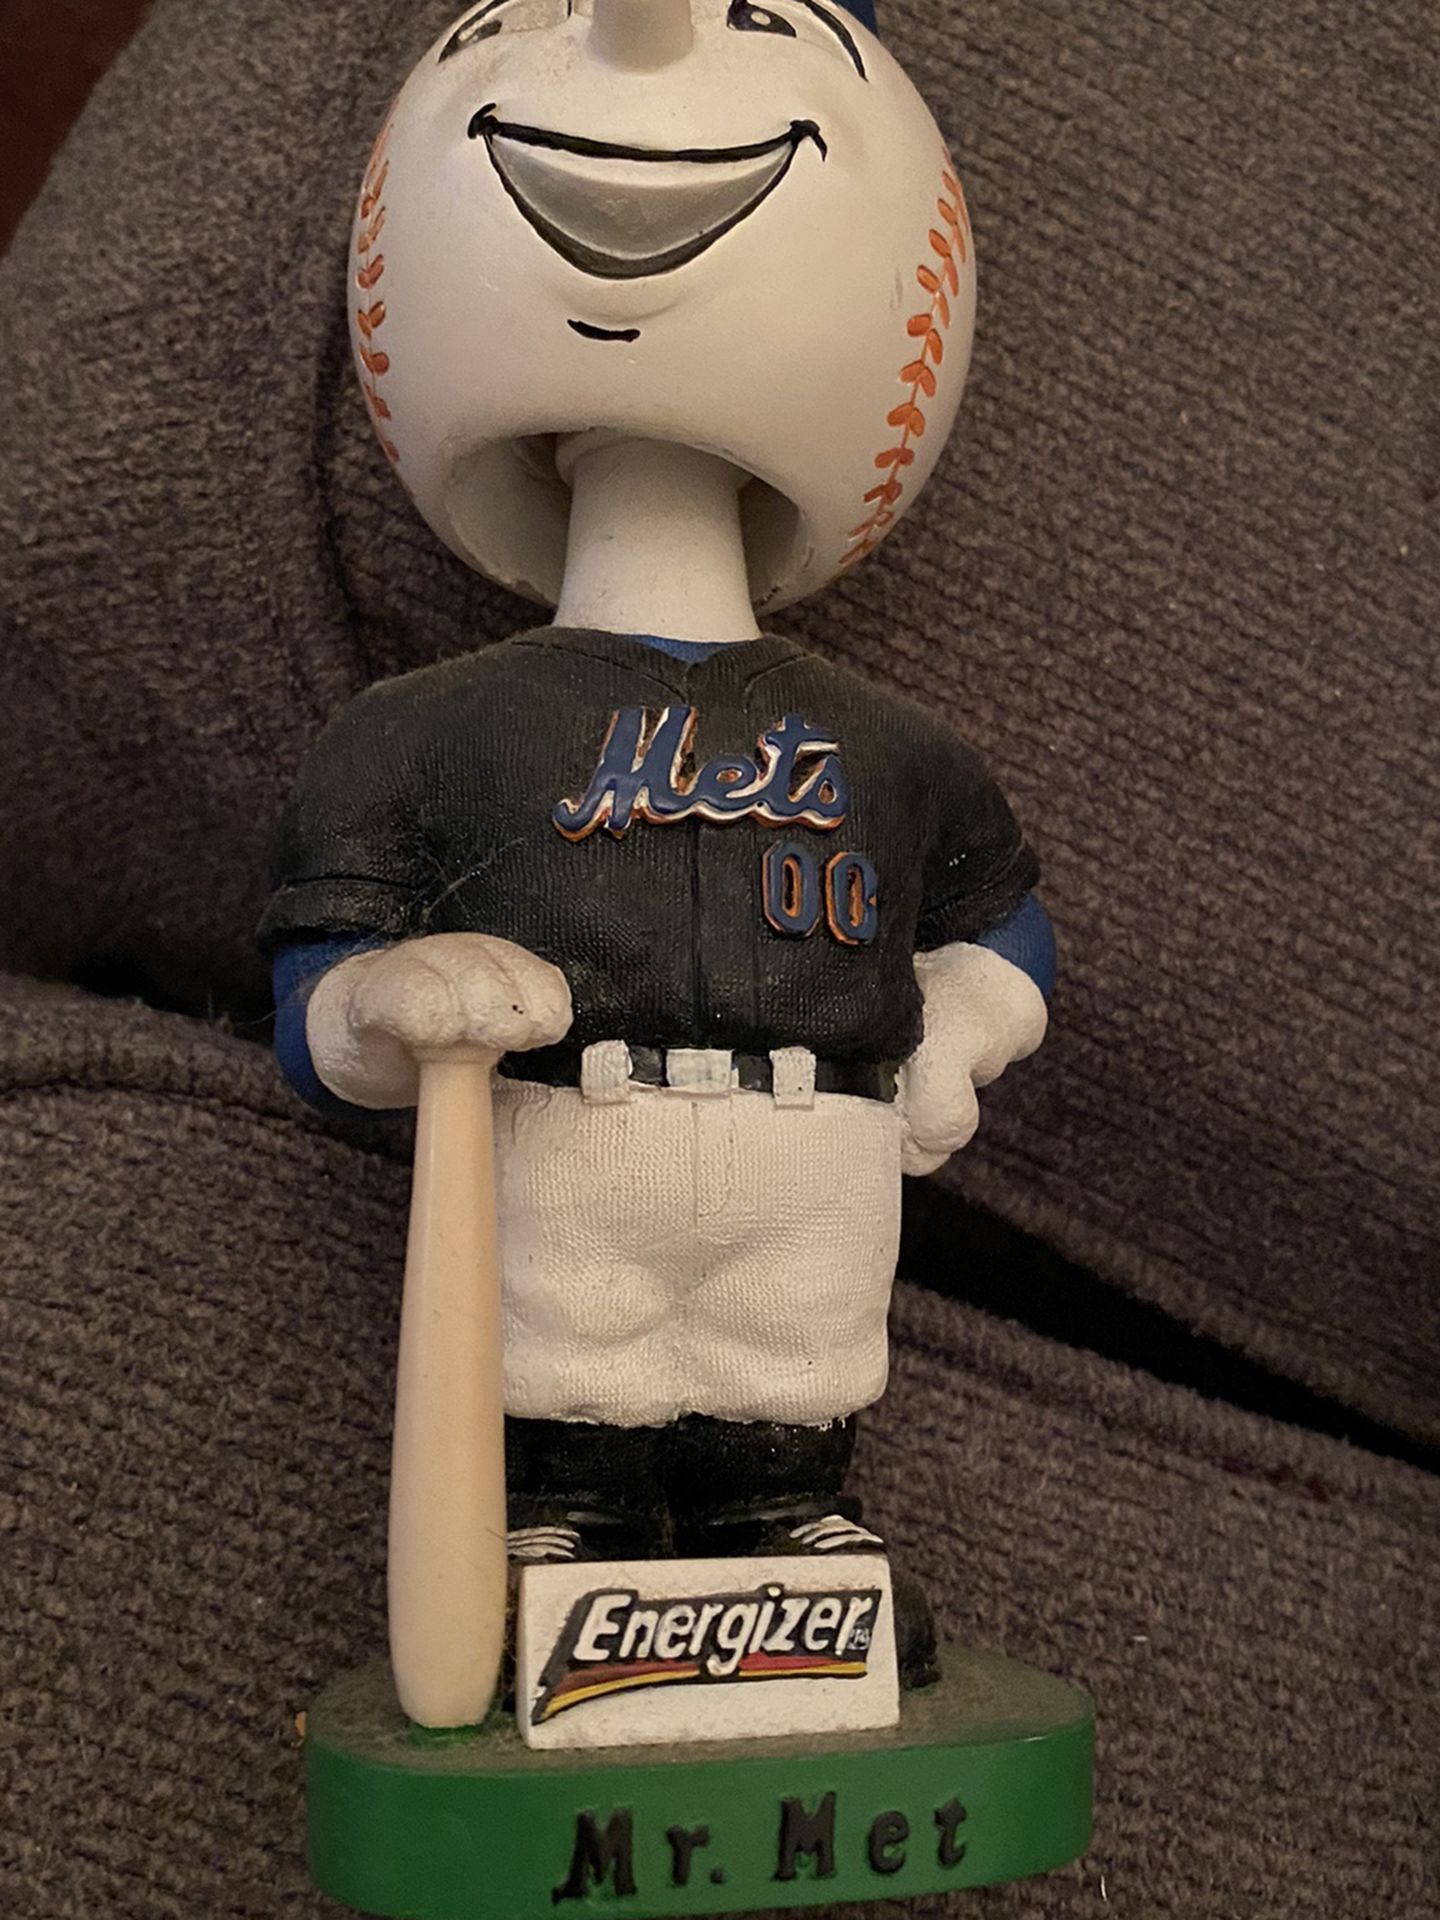 Mr Met Energizer Bobblehead Rare for Sale in Brooklyn, NY - OfferUp